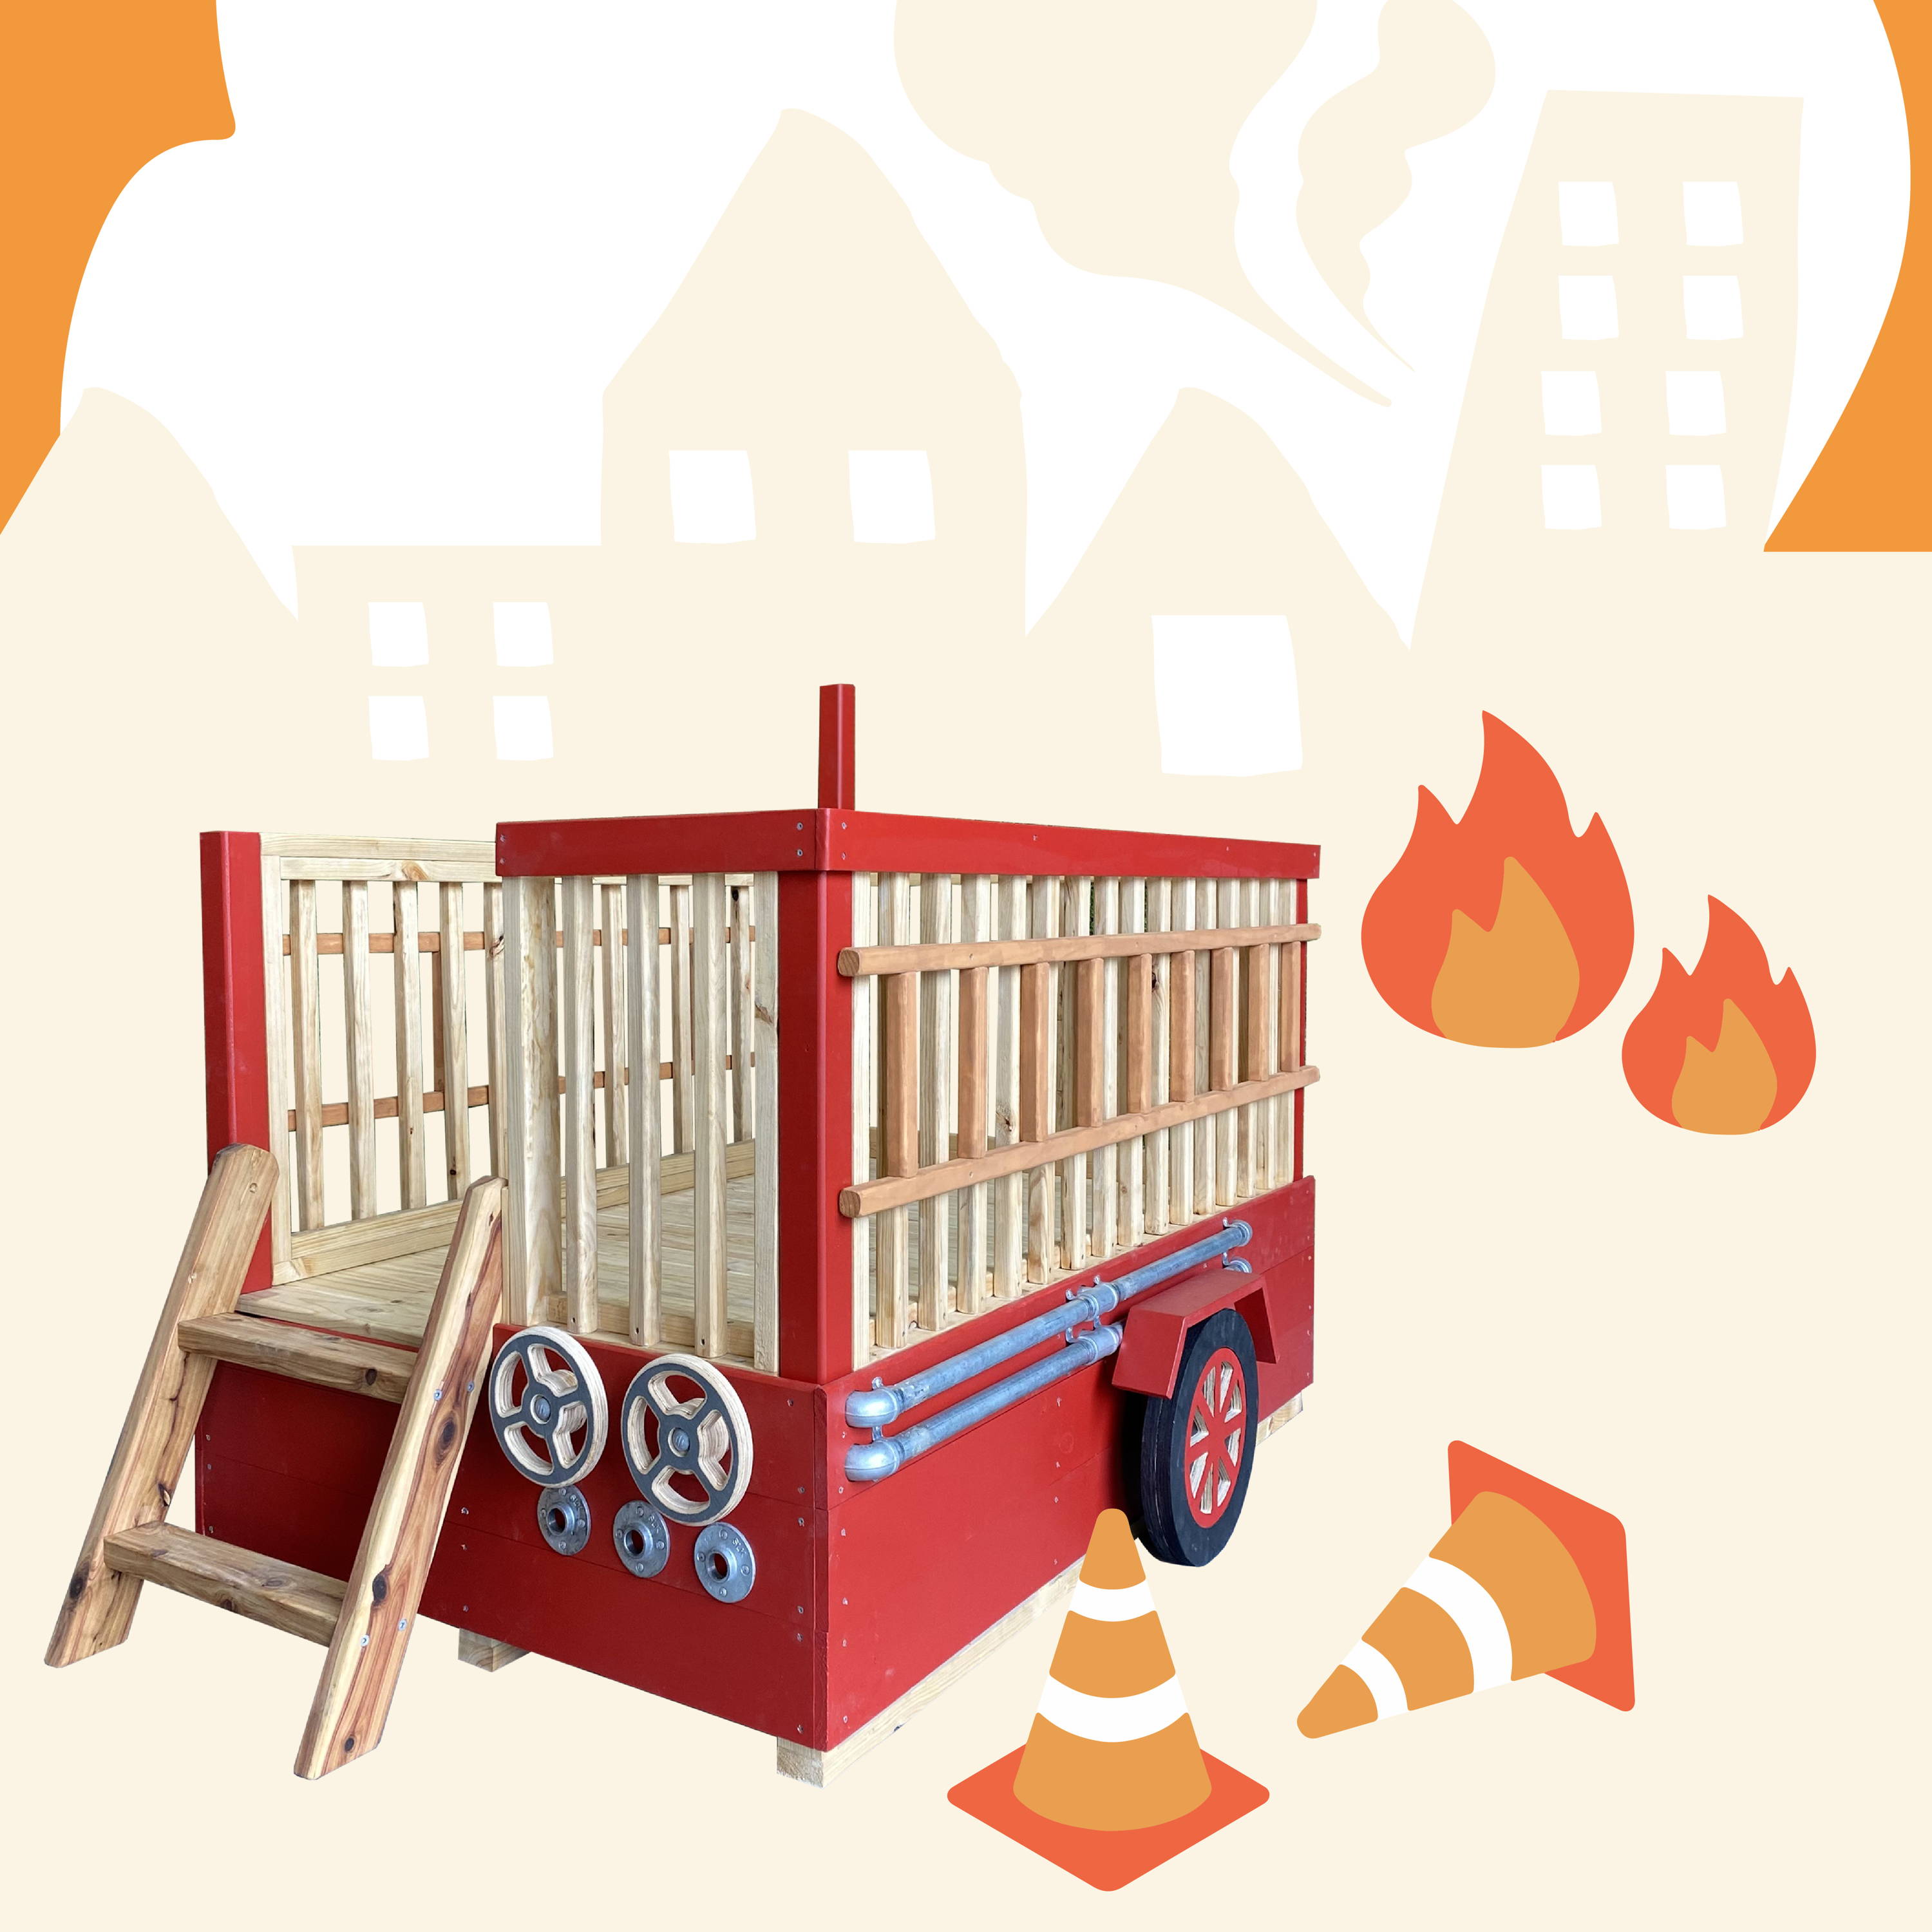 A FireTruck Indoor Cubby with a Fire Illustration